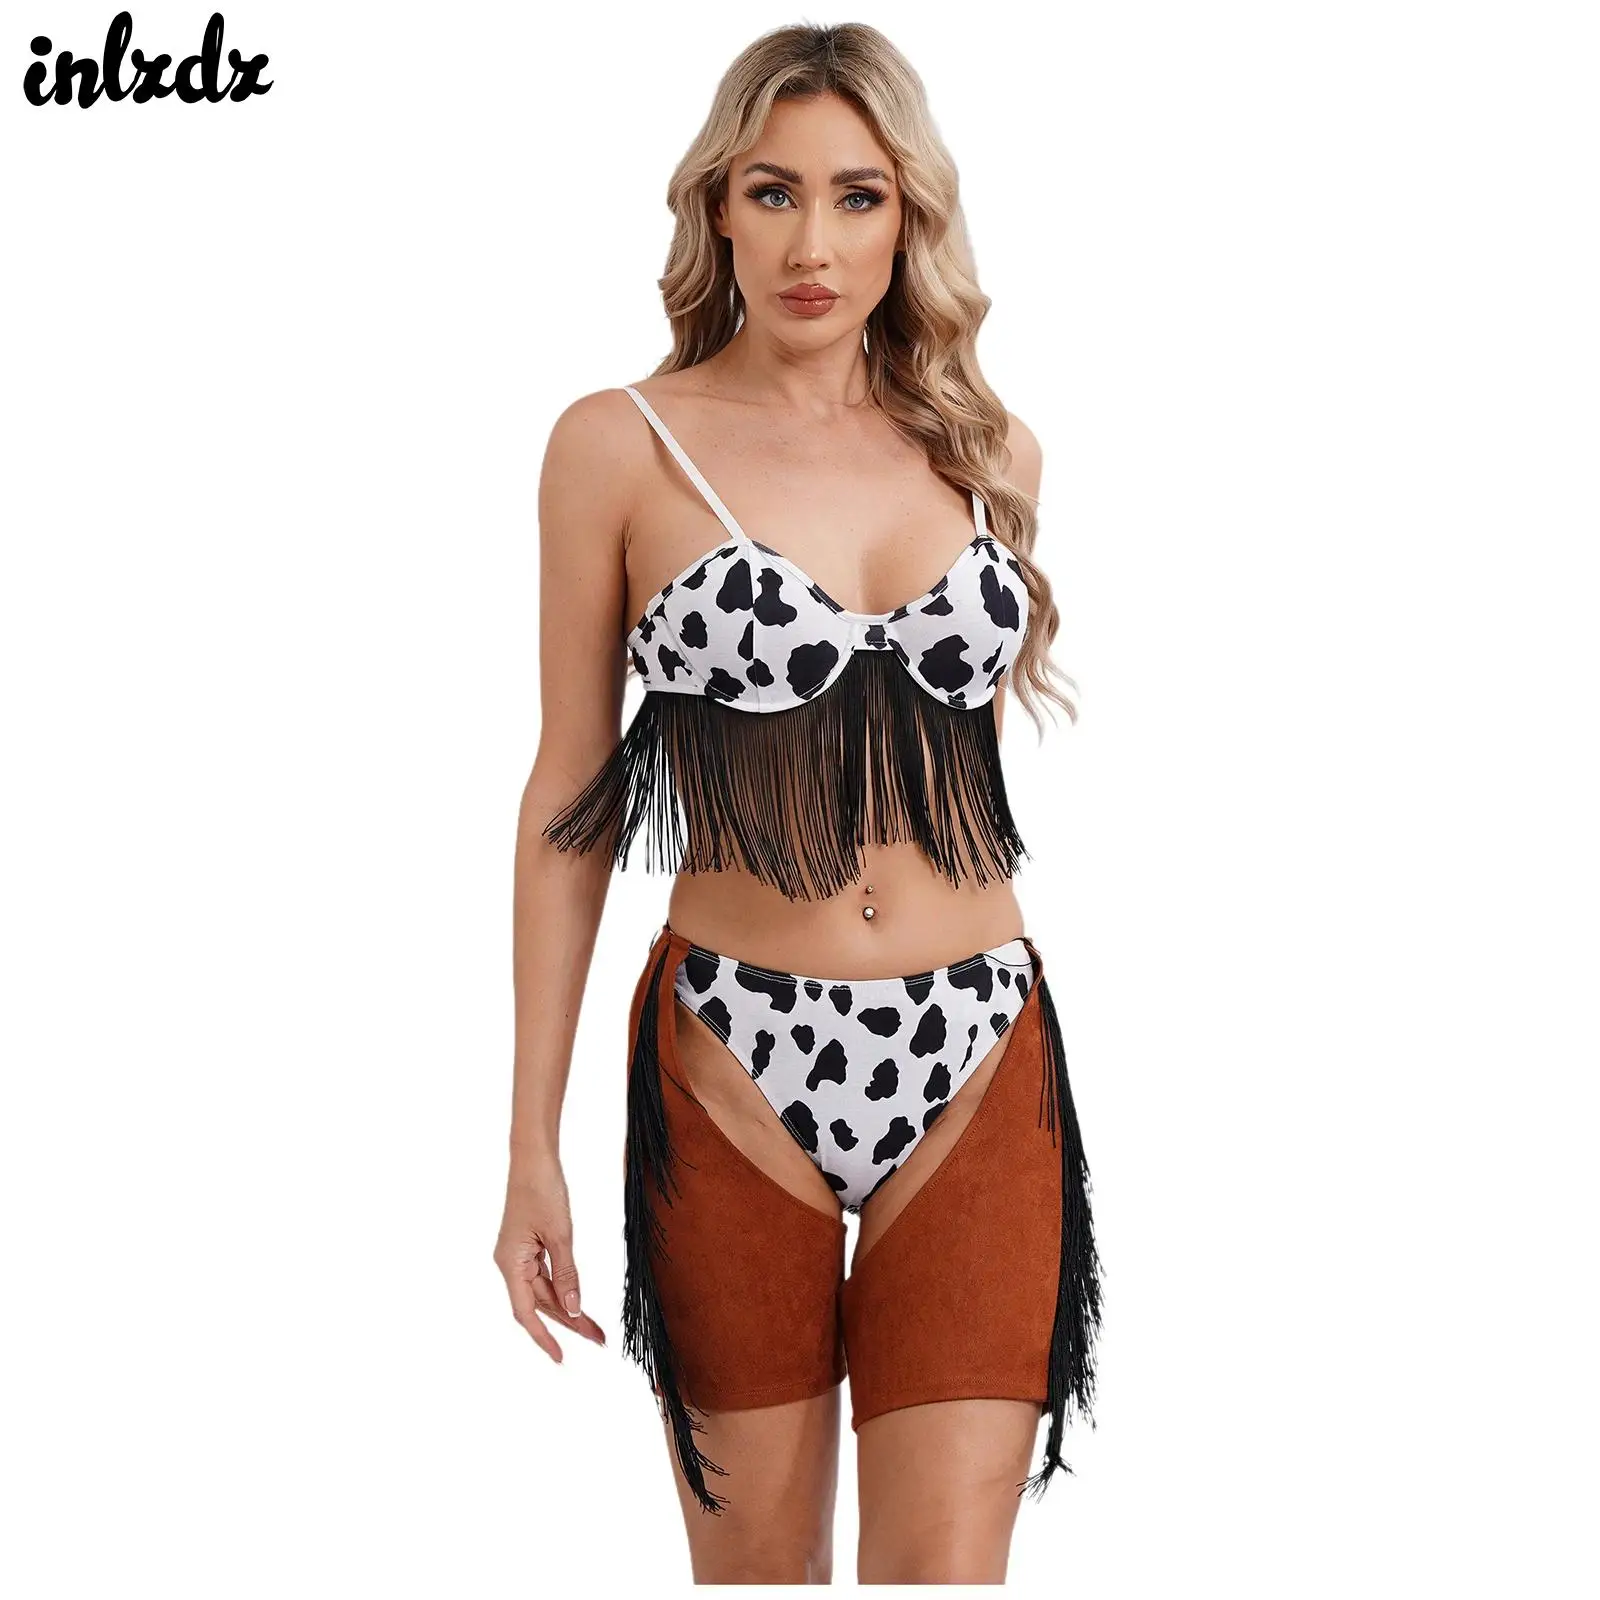 

Womens Cow Spot Print Wild Cowboy Costume Crazy Western Cowgirl Outfit Underwire Fringed Bra Top with Briefs Cutout Shorts